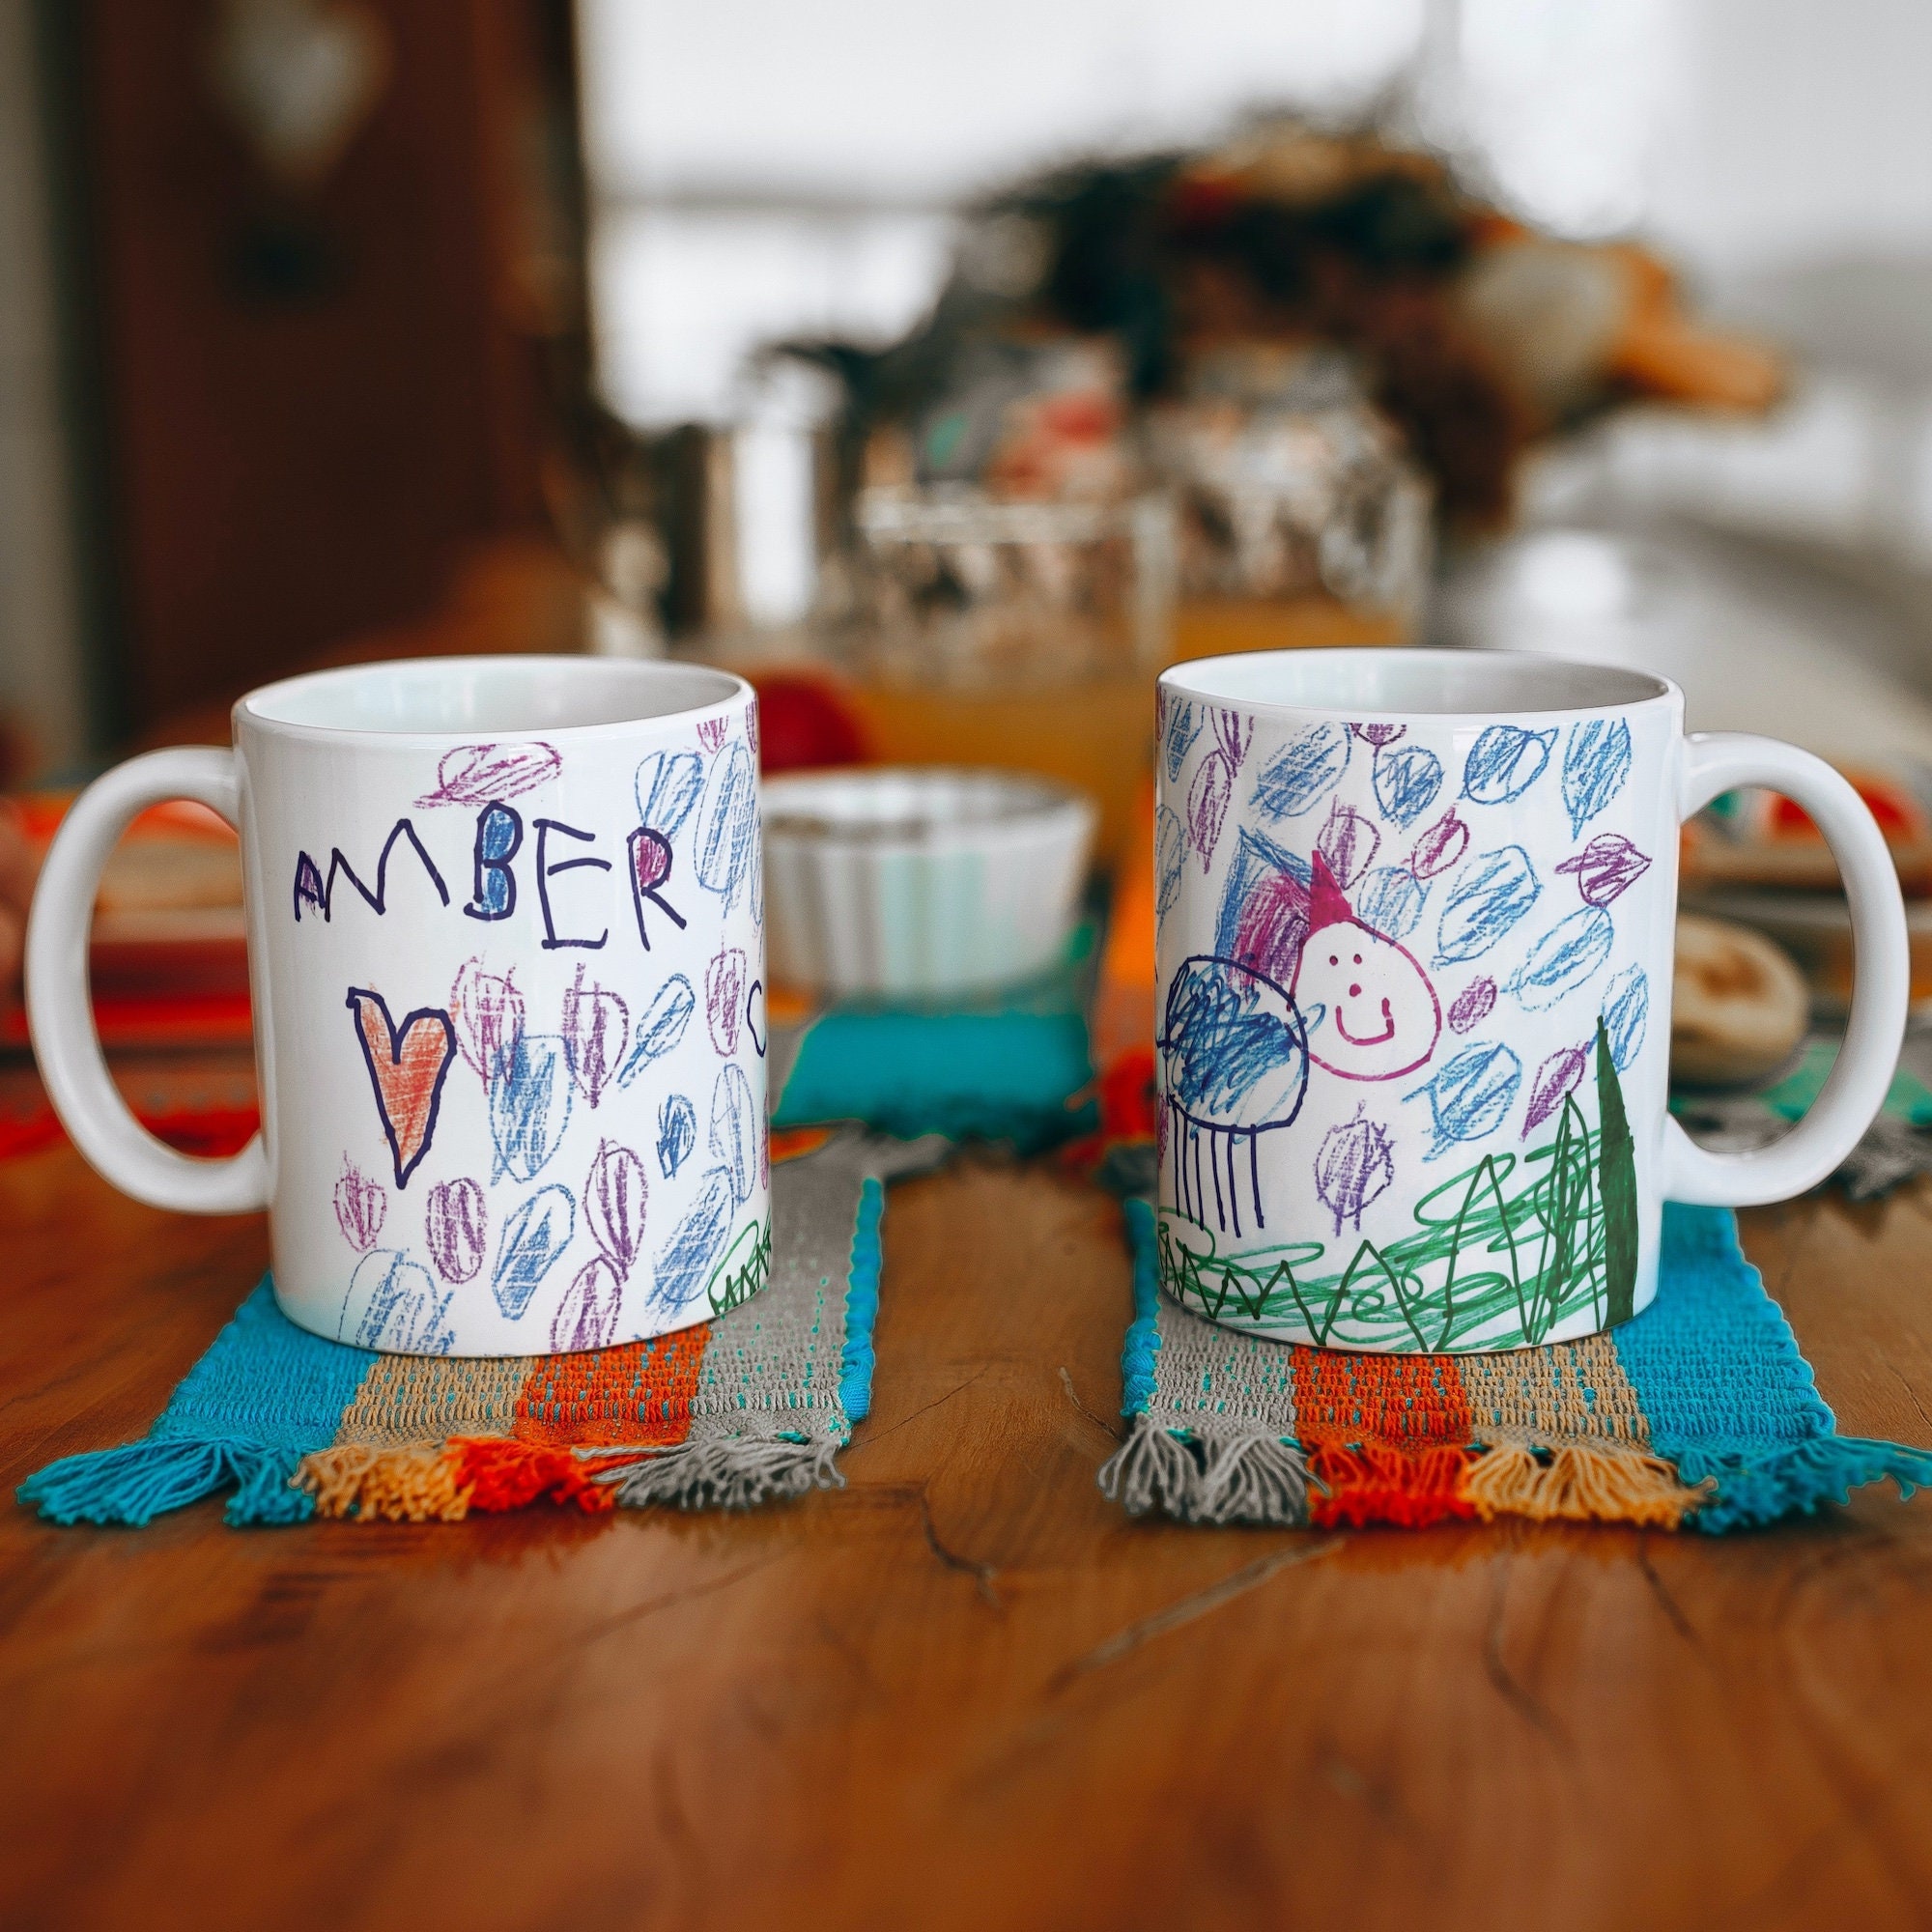 Painting and Drawing Mug, Painting and Drawing Gifts, Gift for Painting and  Drawing Lover, Gift for Him, Gift for Her, Personalized Mug 